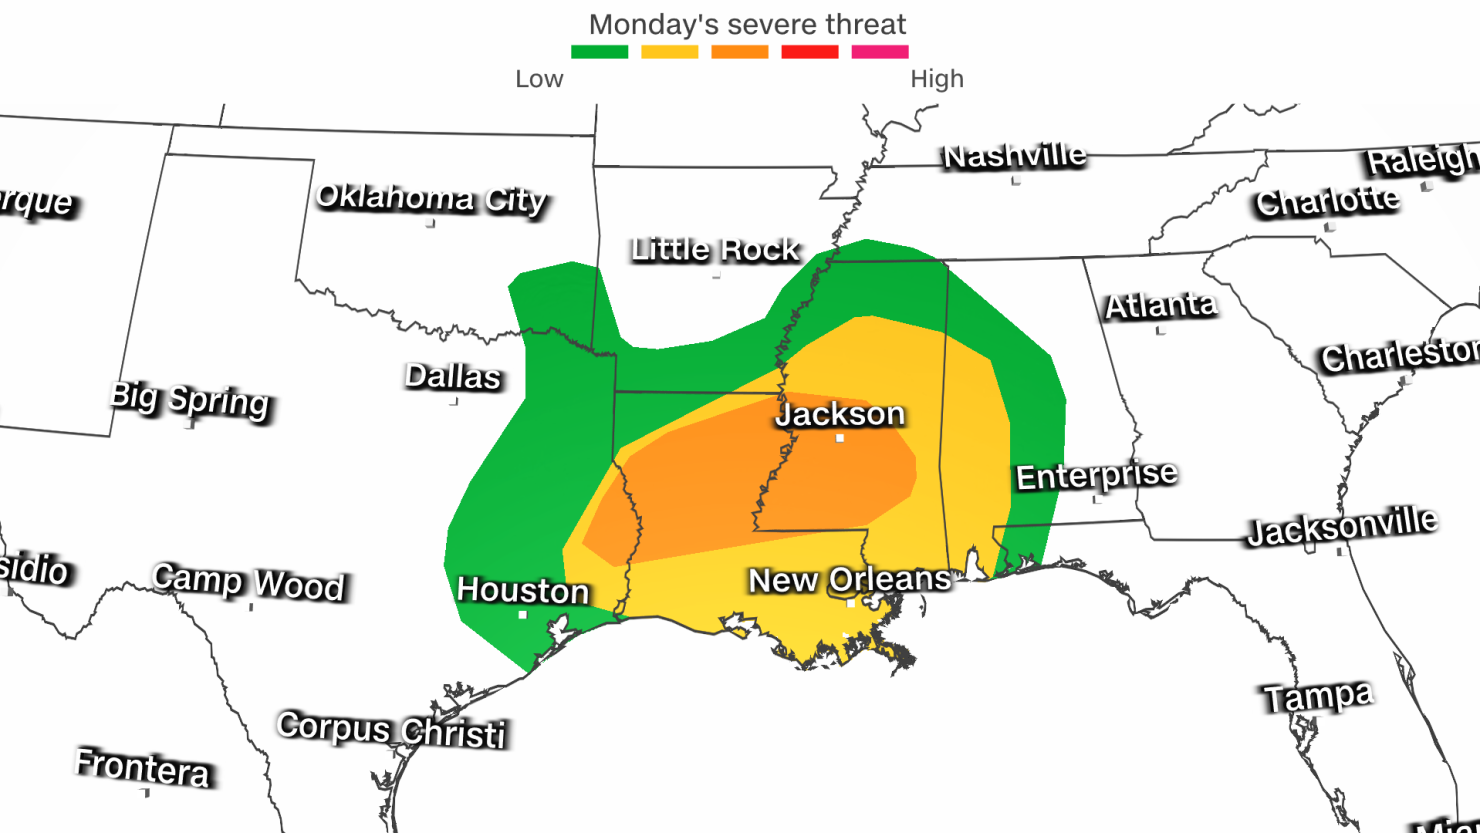 Severe thunderstorms will continue to develop on Monday.